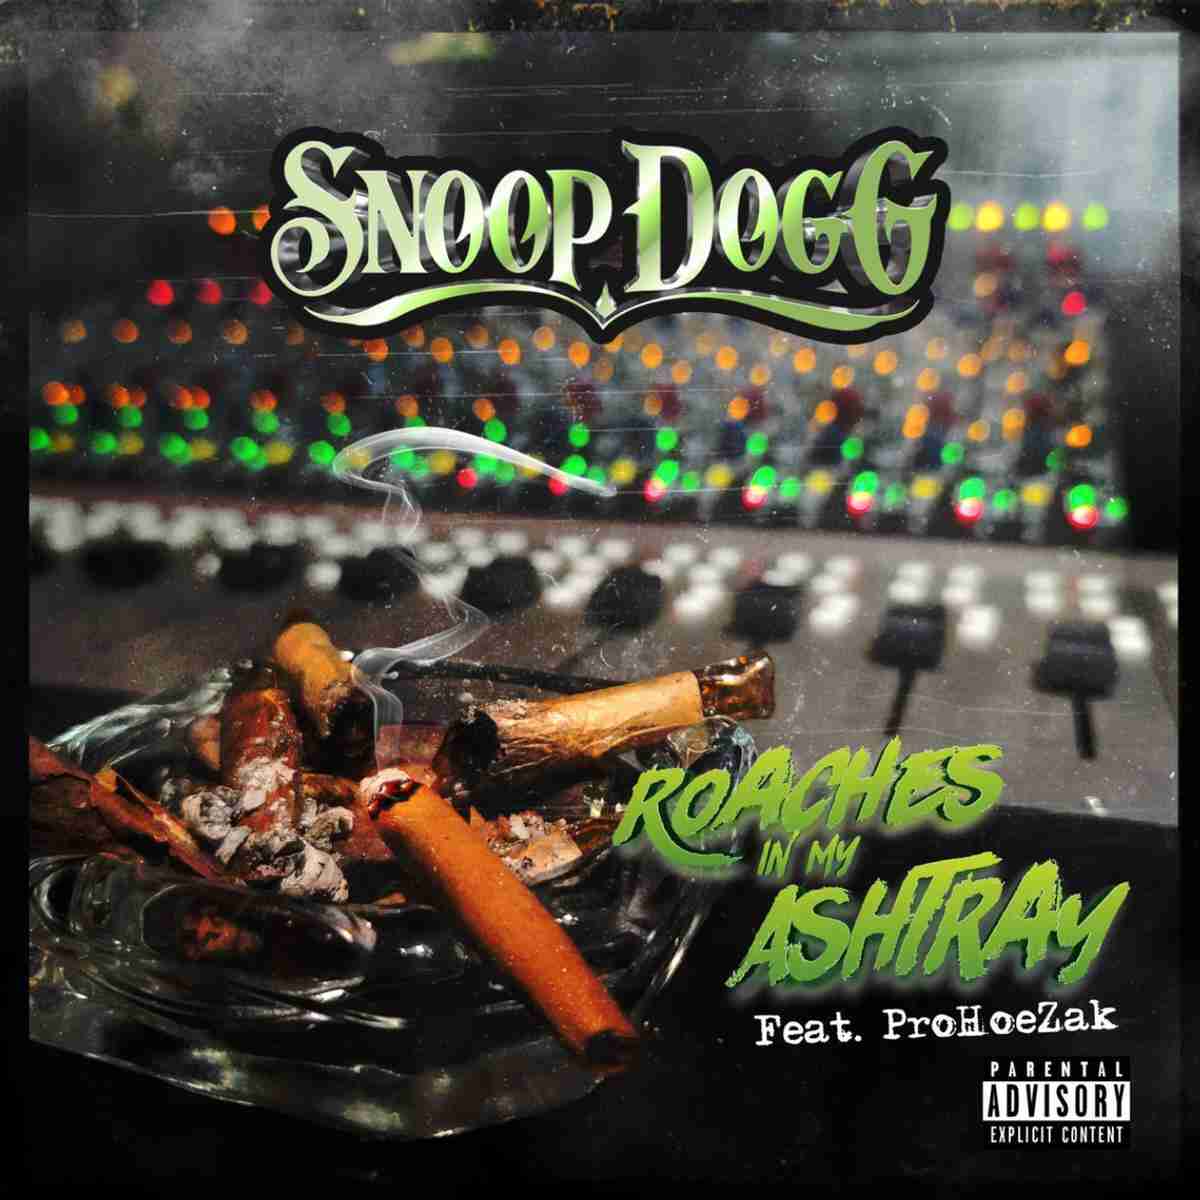 Snoop Dogg - Roaches In My Ashtray Ft. ProHoeZak